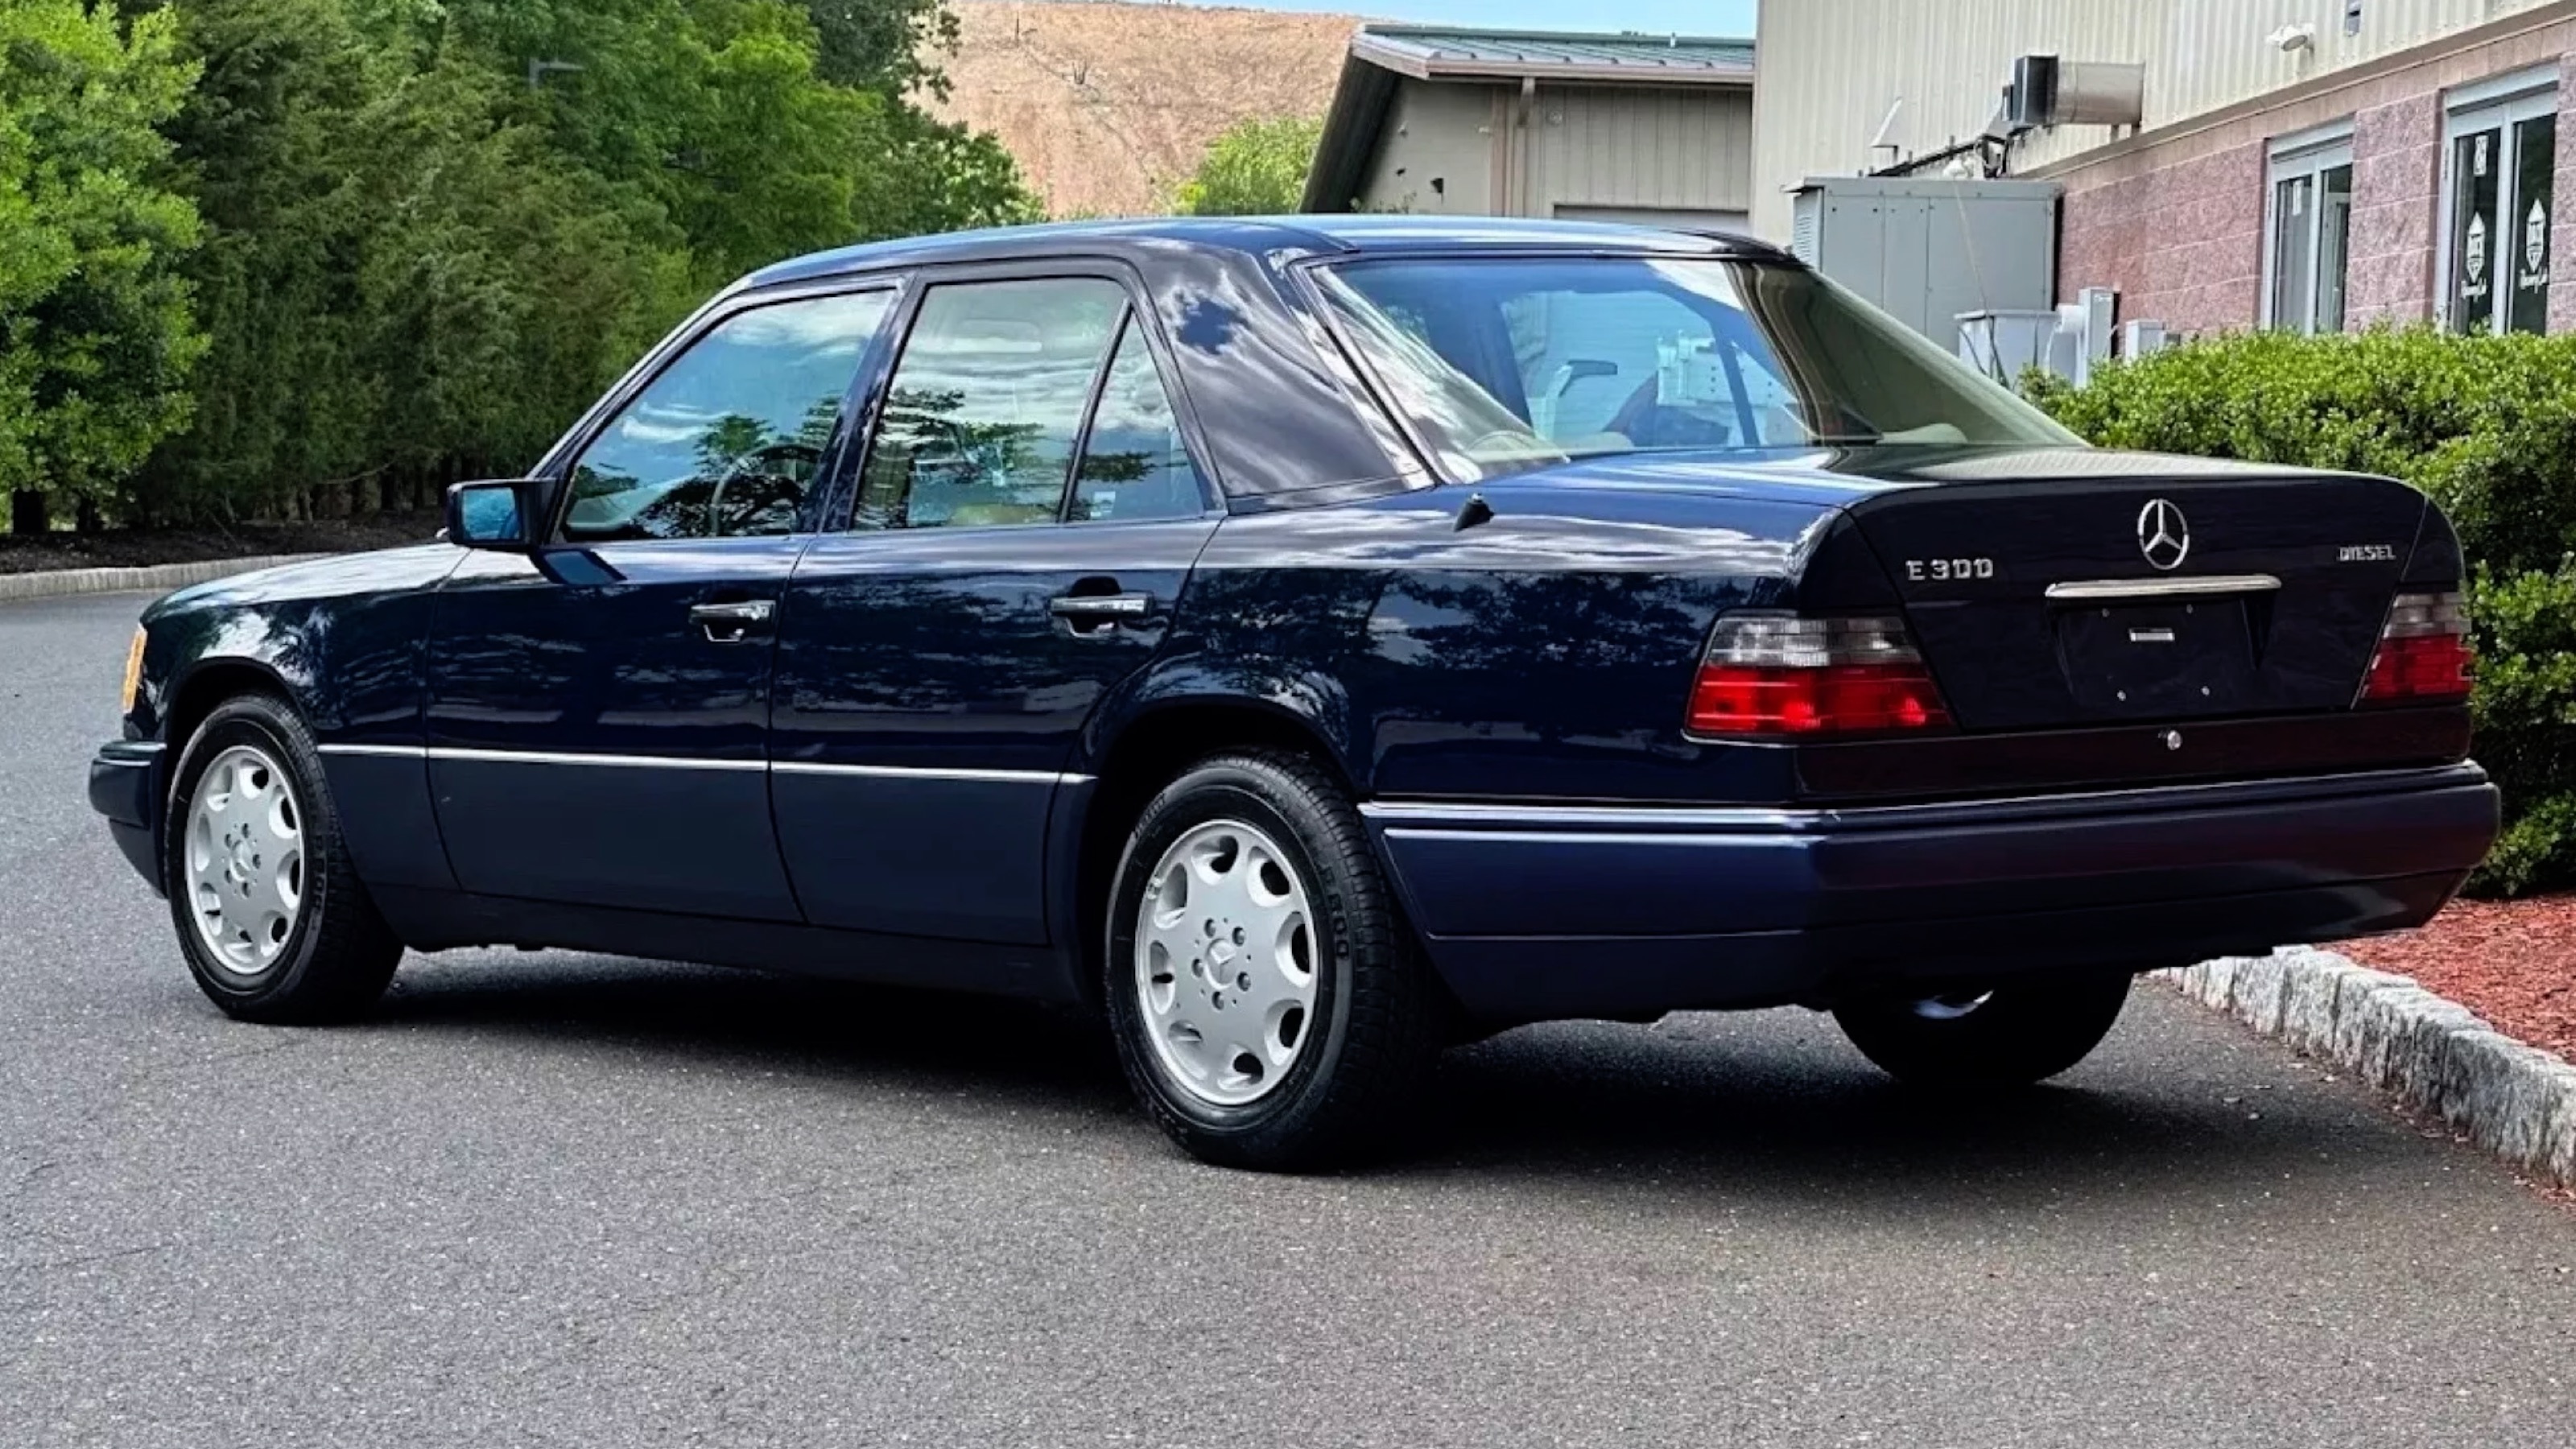 You’ll never guess how much this old Mercedes E 300 diesel costs